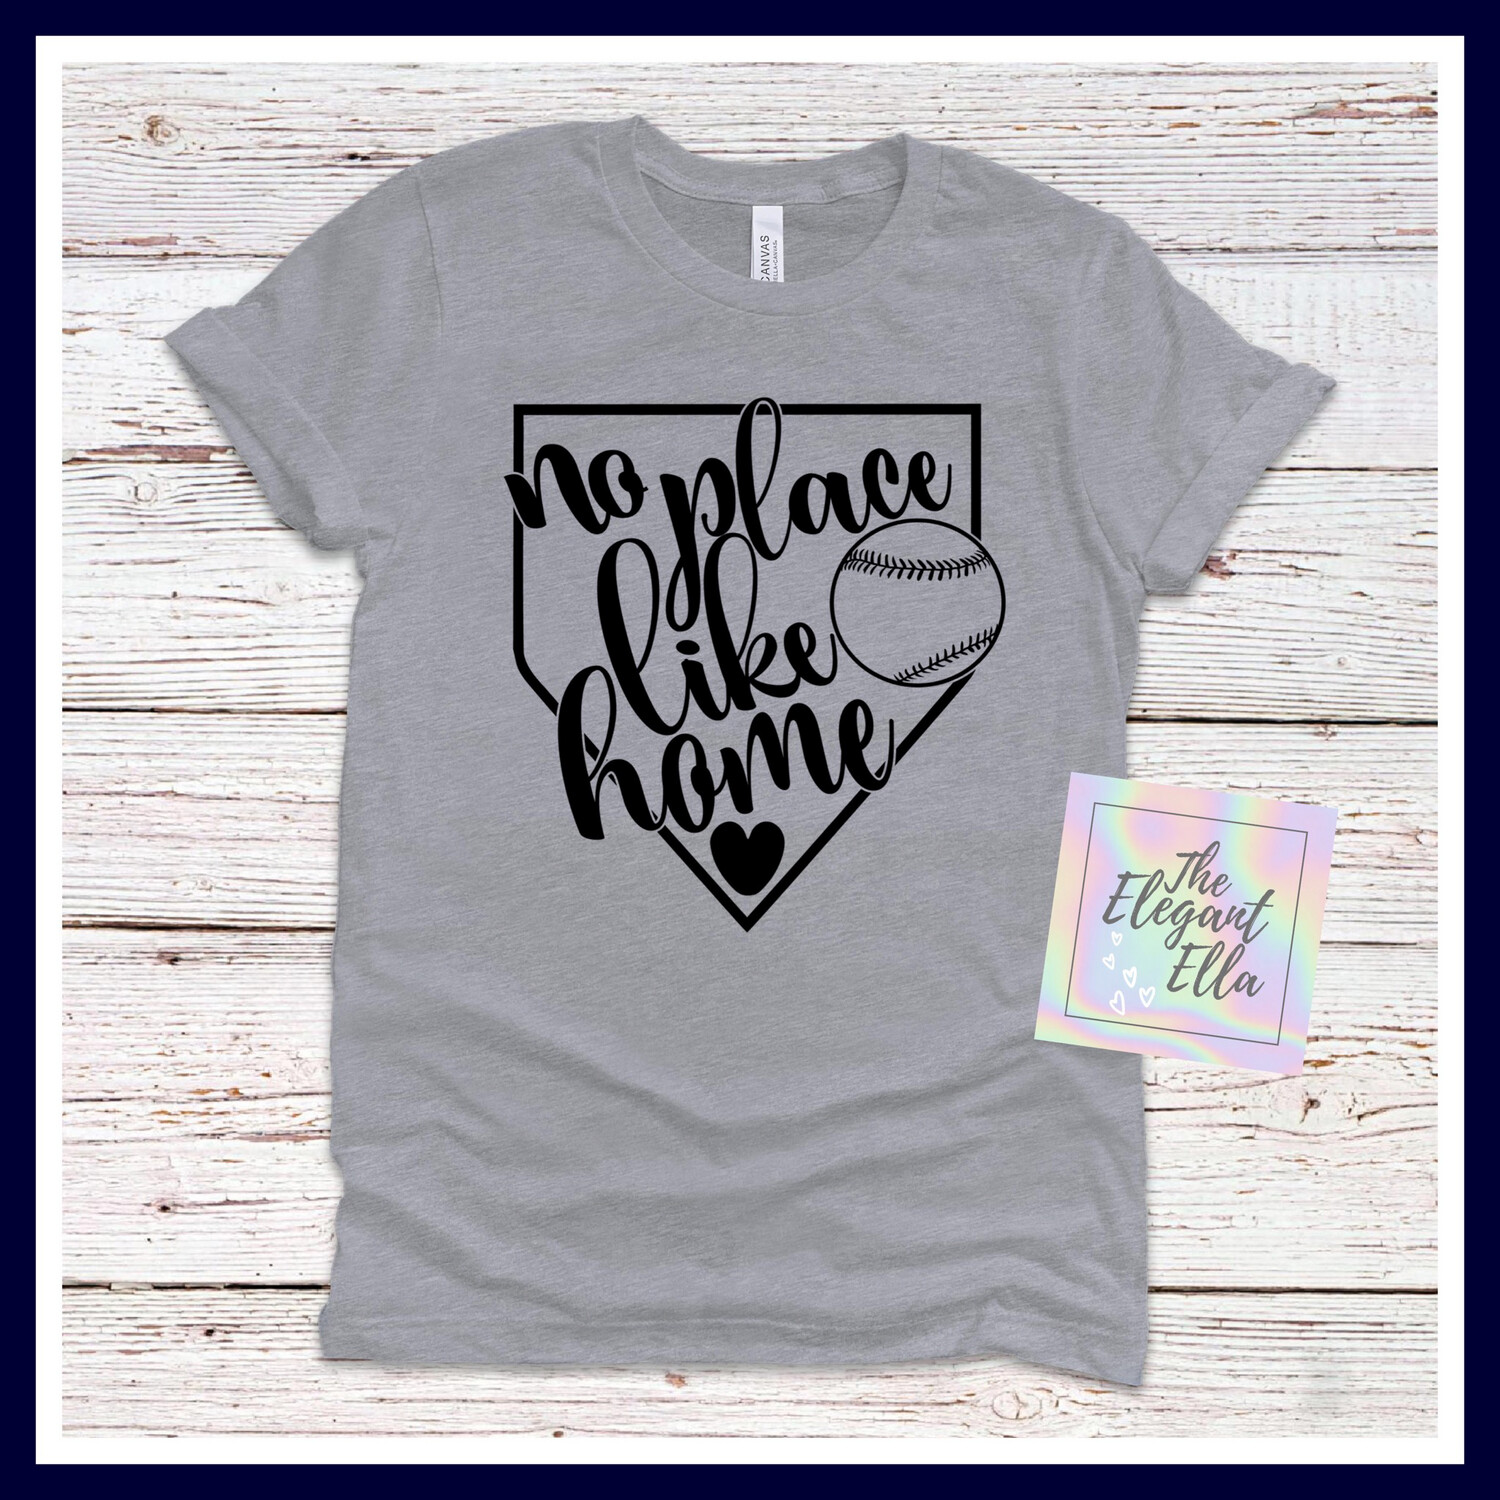  There’s No Place Like Home Baseball T Shirt